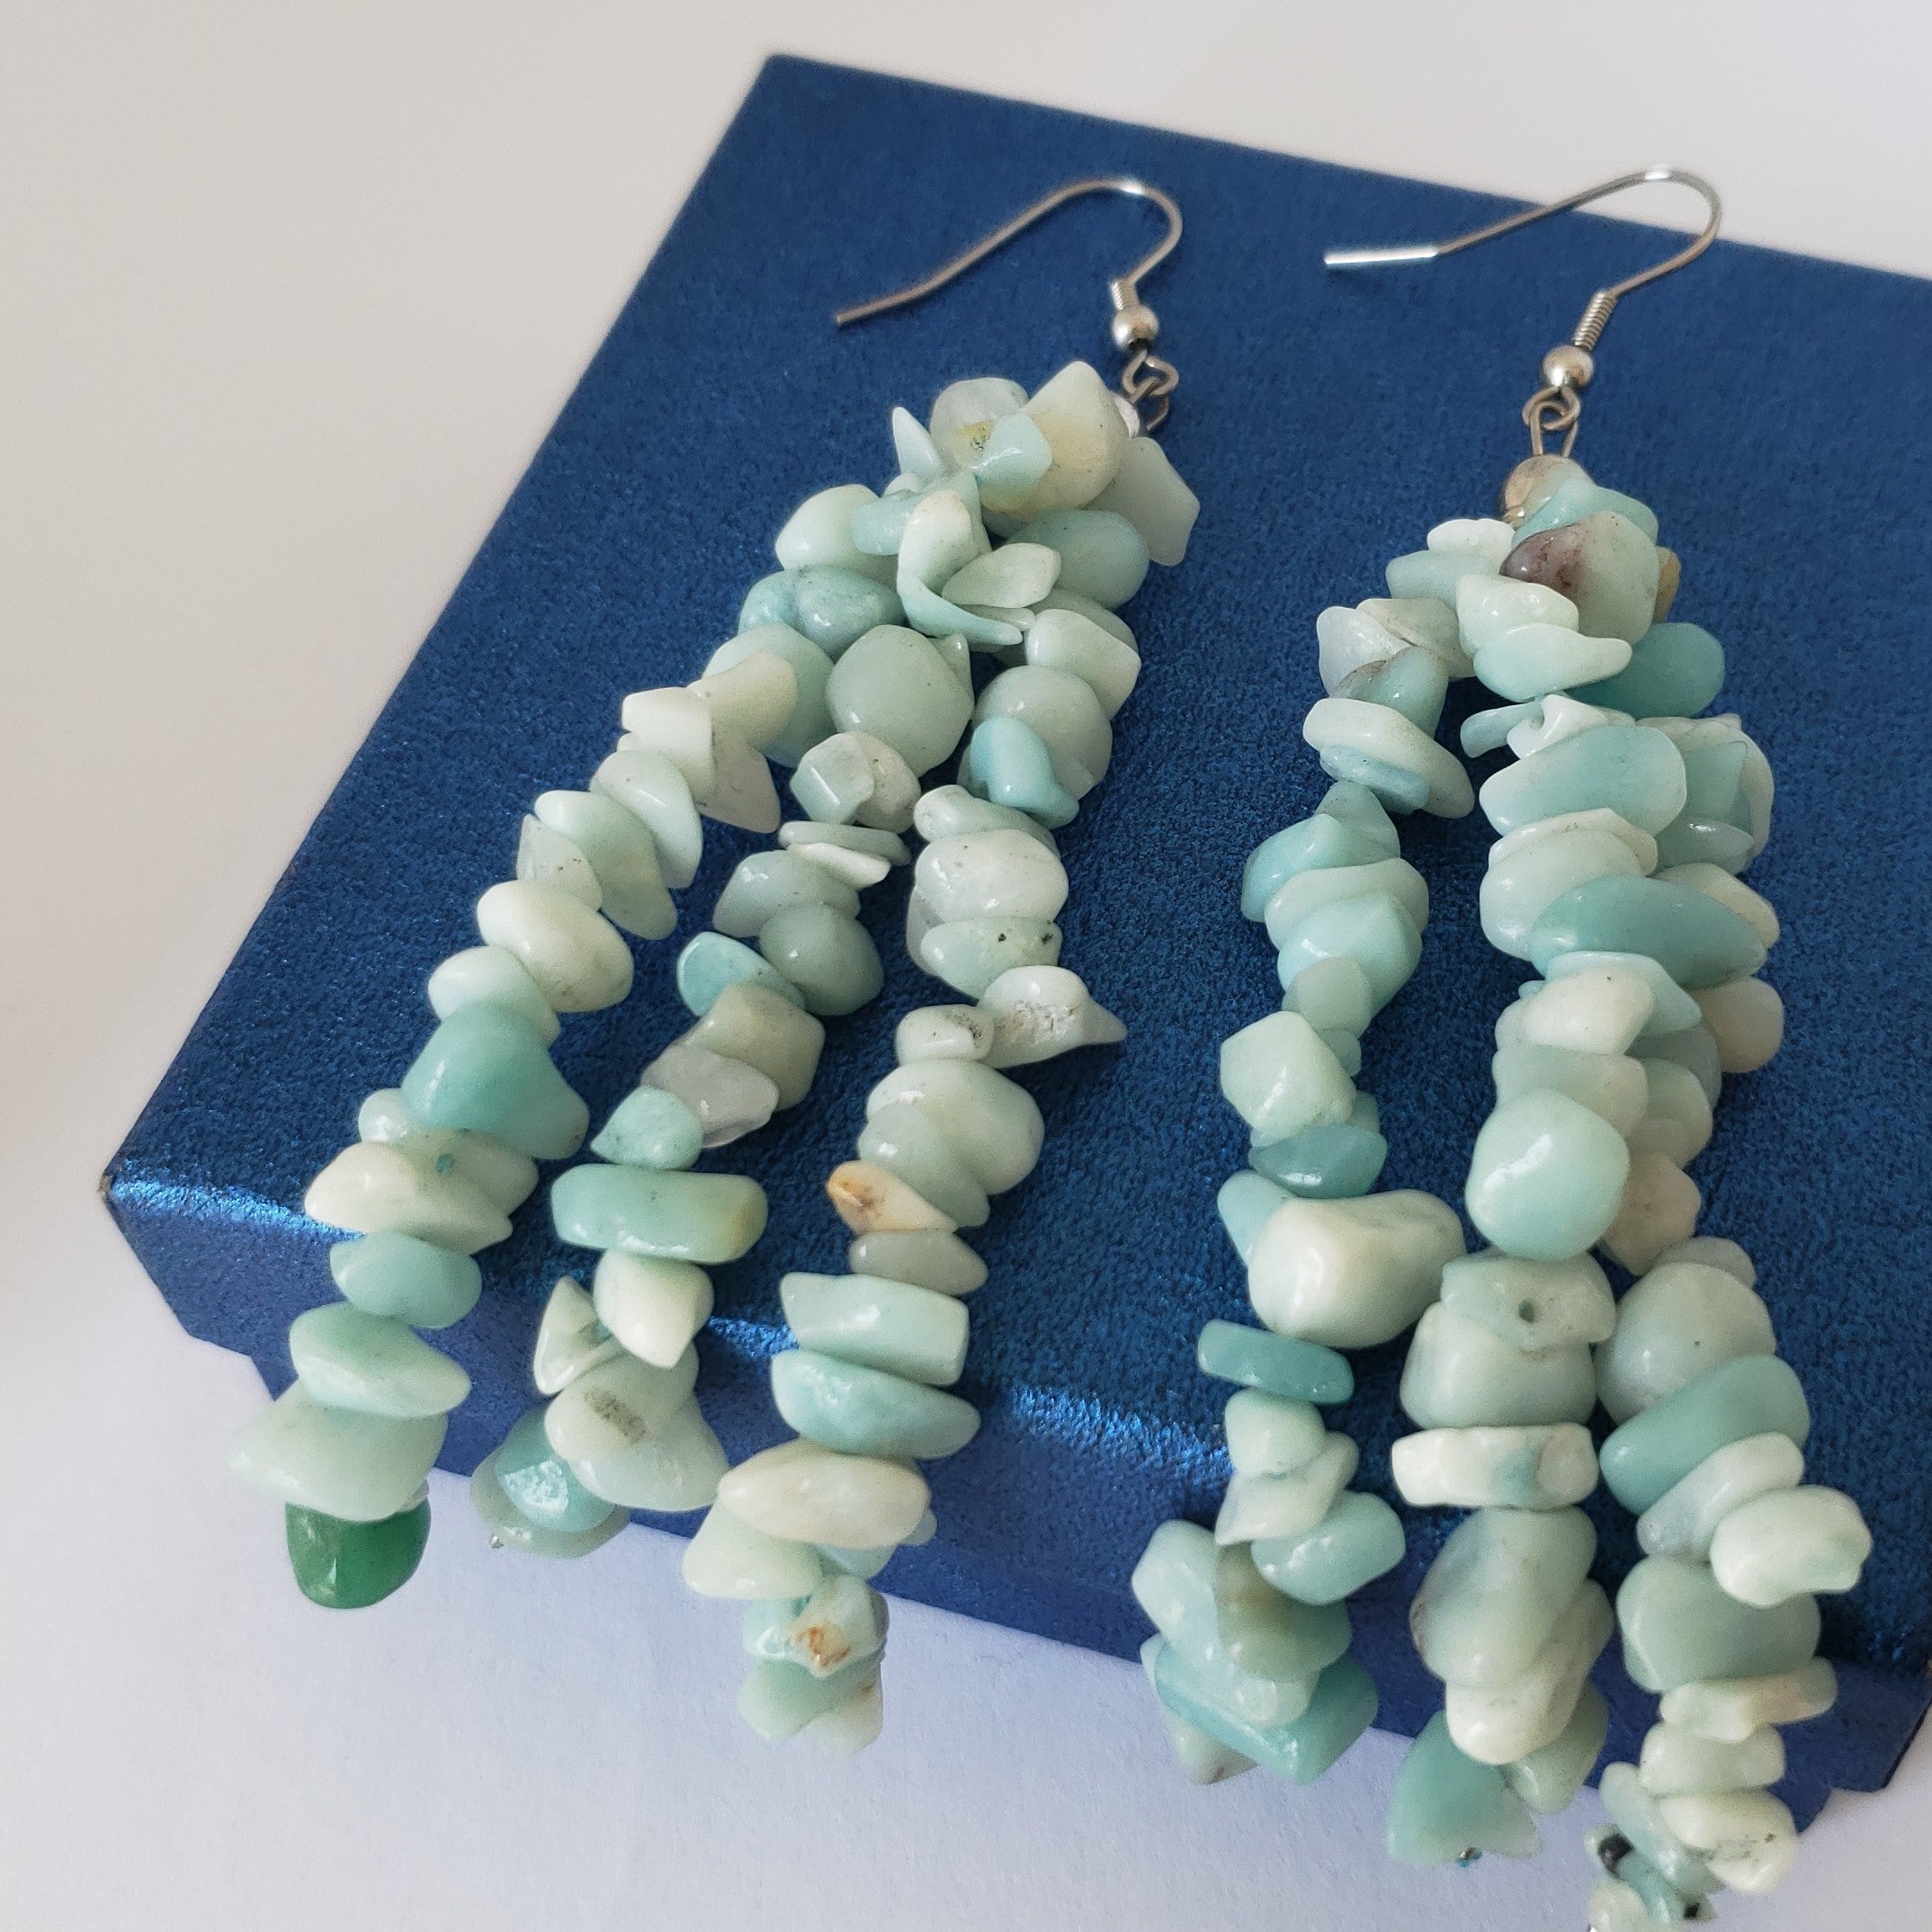 Russian Amazonite Polished Chip Beads Triple Strand Earrings in Stainless Steel - Houzz of DVA Boutique